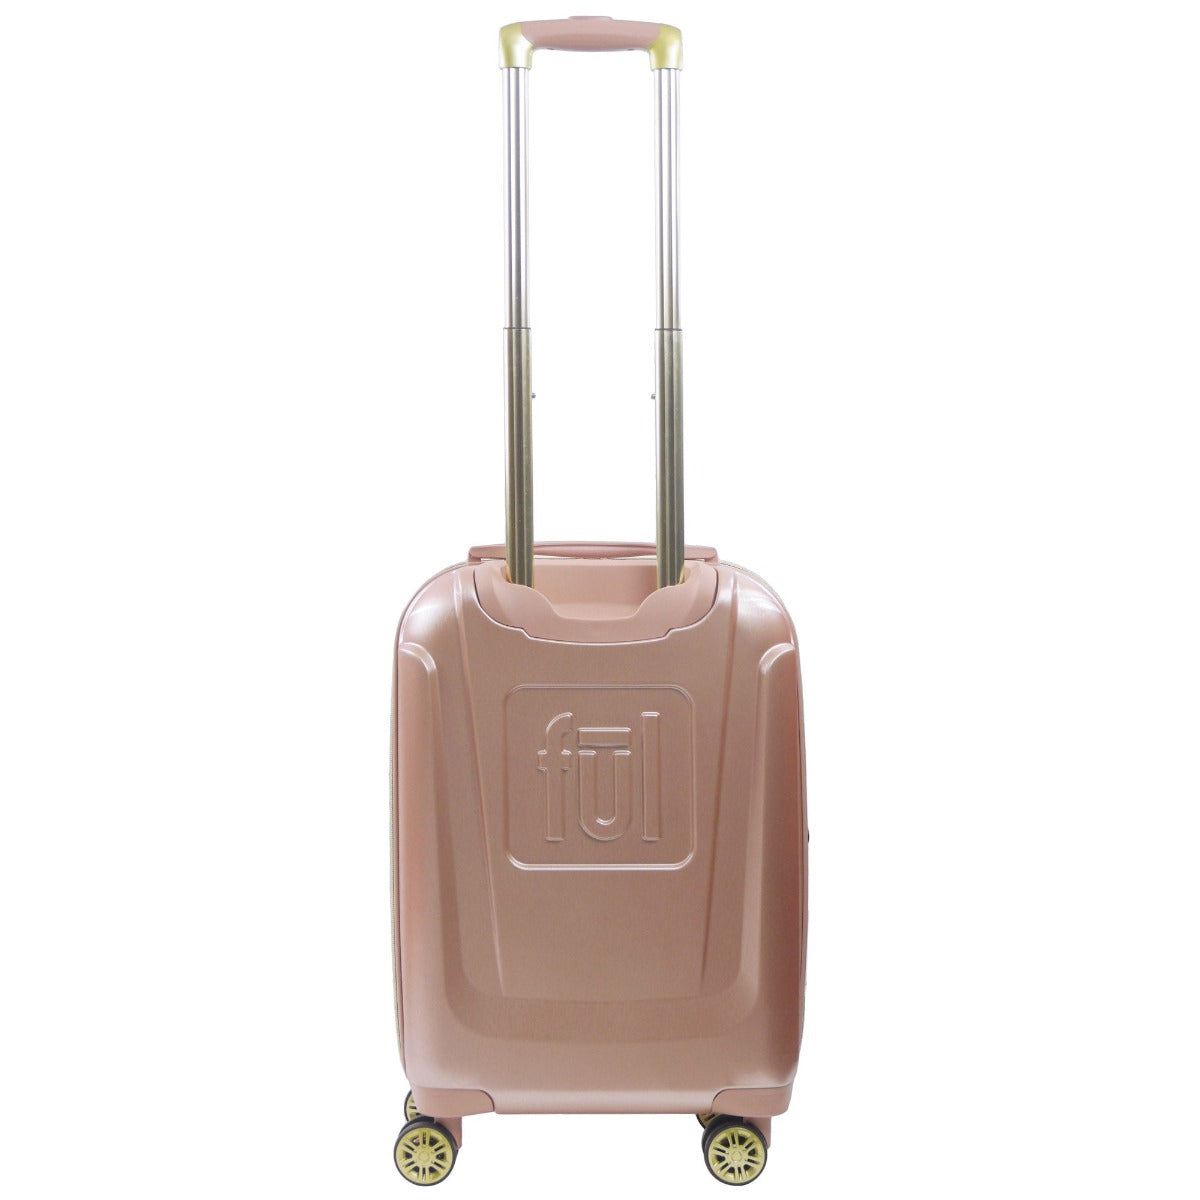 Ful Disney Minnie Mouse 22.5" luggage spinner rose gold - best hardshell carry on suitcase for travel